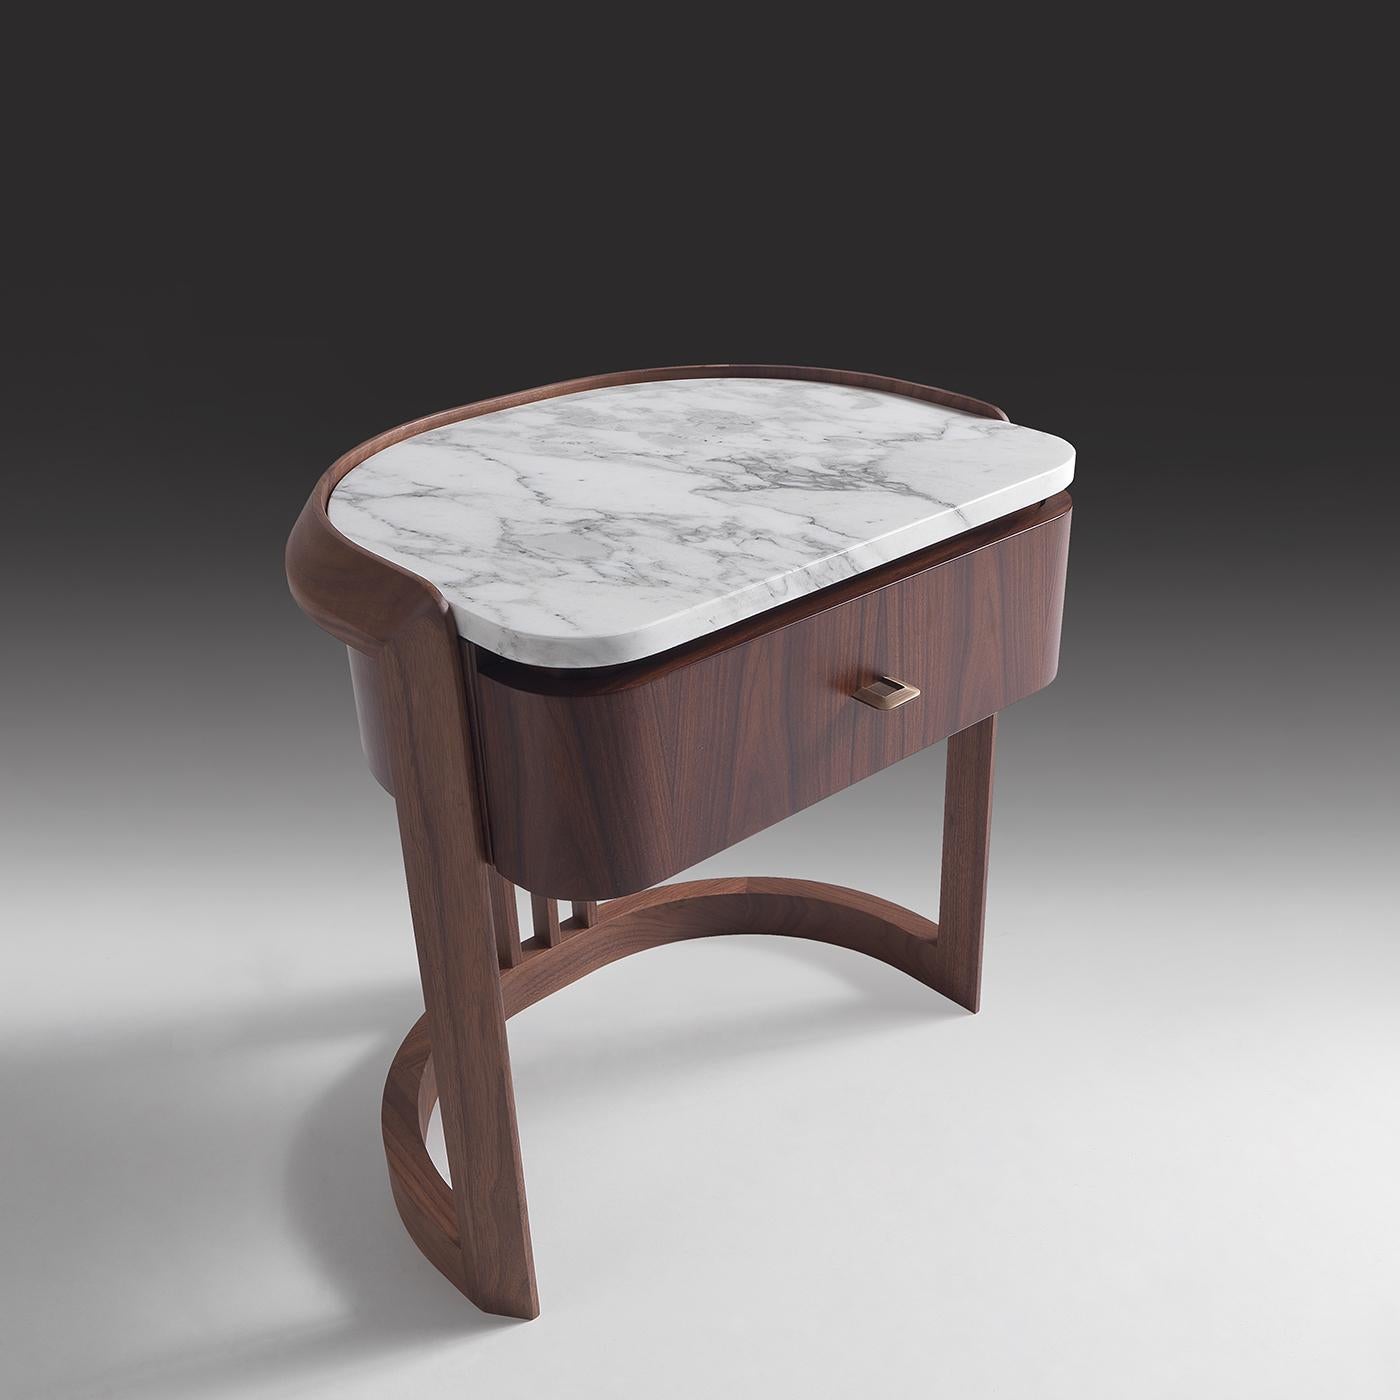 Clean and sophisticated as the signature features of Annibale Colombo's design, this splendid bedside table will make for an exceptional complement to a contemporary-style bedroom decor. Handcrafted of Canaletto walnut and rosewood, it displays a